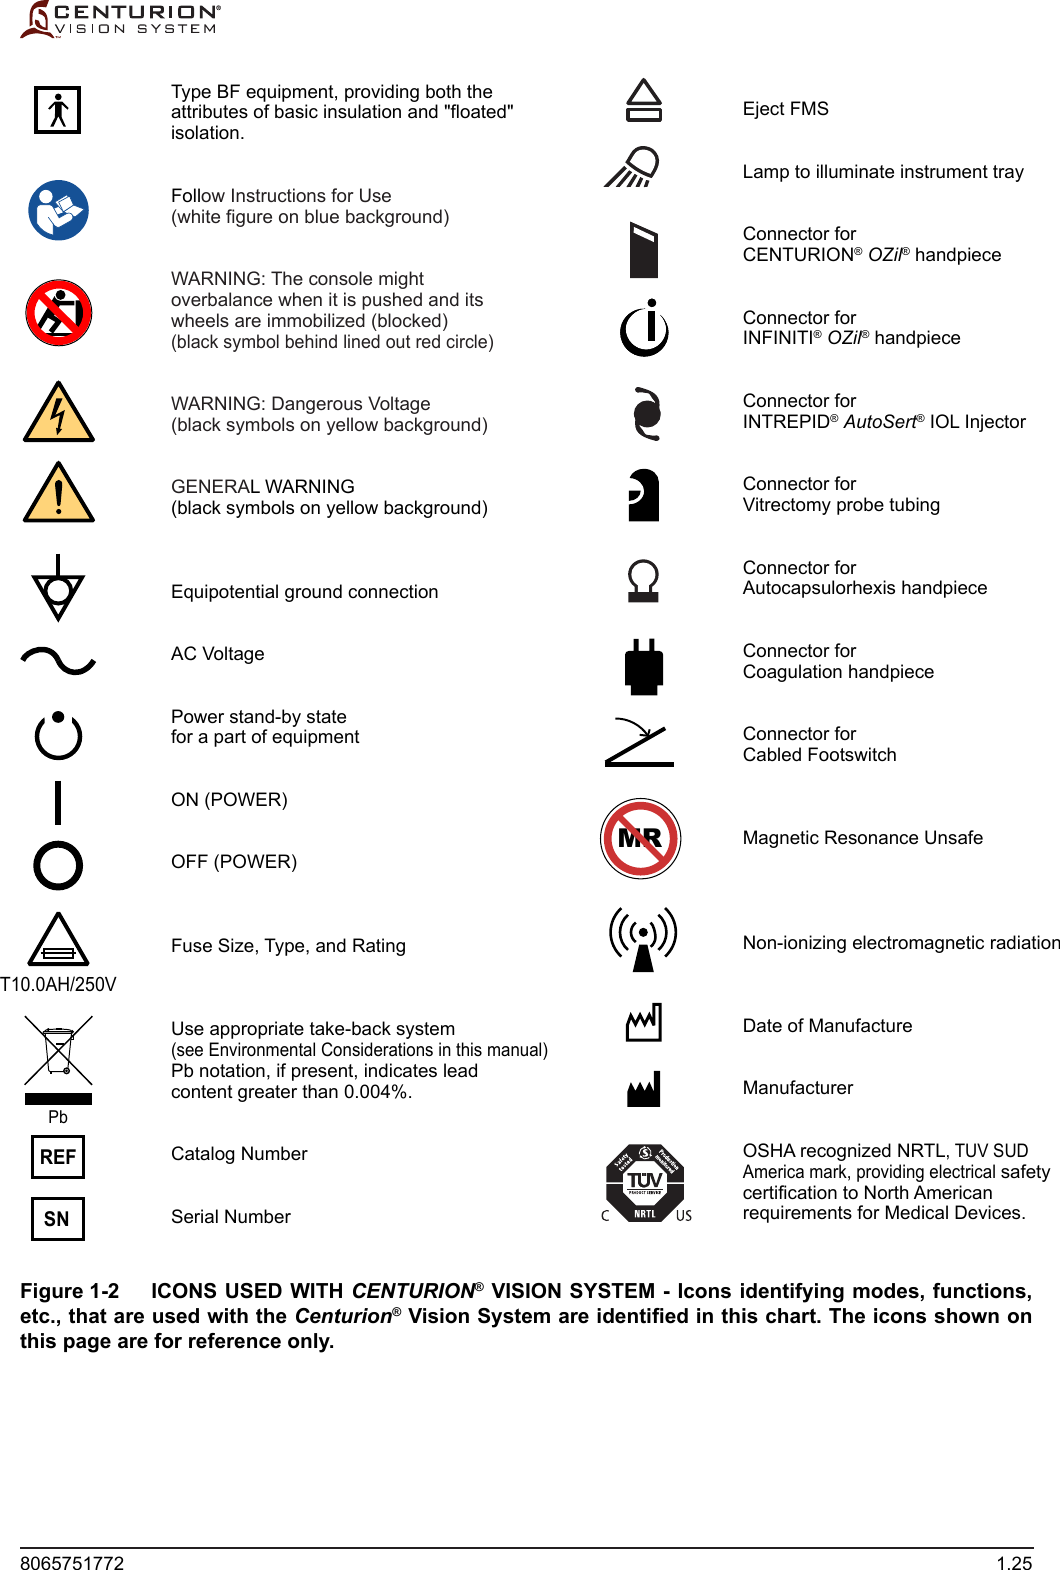 8065751772 1.25Figure 1-2  ICONS USED WITH CENTURION® VISION SYSTEM - Icons identifying modes, functions, etc., that are used with the Centurion® Vision System are identied in this chart. The icons shown on this page are for reference only.Eject FMSLamp to illuminate instrument trayConnector forCENTURION® OZil® handpieceConnector forINFINITI® OZil® handpieceConnector forINTREPID® AutoSert® IOL InjectorConnector forVitrectomy probe tubingConnector forAutocapsulorhexis handpieceConnector forCoagulation handpieceConnector forCabled FootswitchMagnetic Resonance UnsafeNon-ionizing electromagnetic radiationDate of ManufactureManufacturerOSHA recognized NRTL, TUV SUDAmerica mark, providing electrical safetycertification to North Americanrequirements for Medical Devices.Type BF equipment, providing both theattributes of basic insulation and &quot;floated&quot;isolation.Follow Instructions for Use(white figure on blue background)WARNING: The console mightoverbalance when it is pushed and itswheels are immobilized (blocked)(black symbol behind lined out red circle)WARNING: Dangerous Voltage(black symbols on yellow background)GENERAL WARNING (black symbols on yellow background)Equipotential ground connectionAC VoltagePower stand-by statefor a part of equipmentON (POWER)OFF (POWER)Fuse Size, Type, and RatingUse appropriate take-back system(see Environmental Considerations in this manual)Pb notation, if present, indicates leadcontent greater than 0.004%.Catalog NumberSerial NumberPbSNREFT10.0AH/250VMR